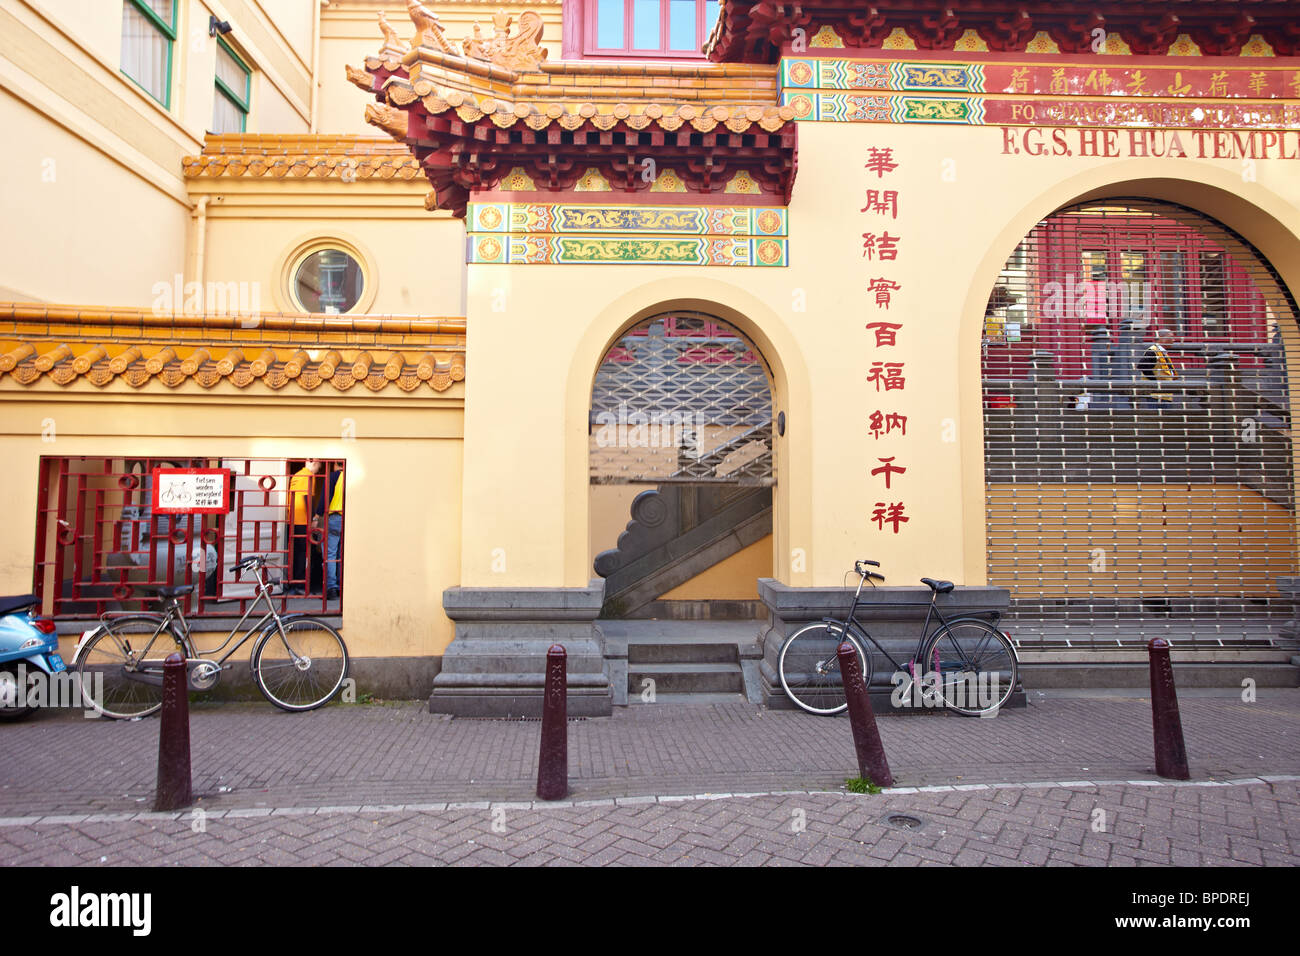 Guang Shan He Hua temple in Chinatown in Amsterdam Stock Photo